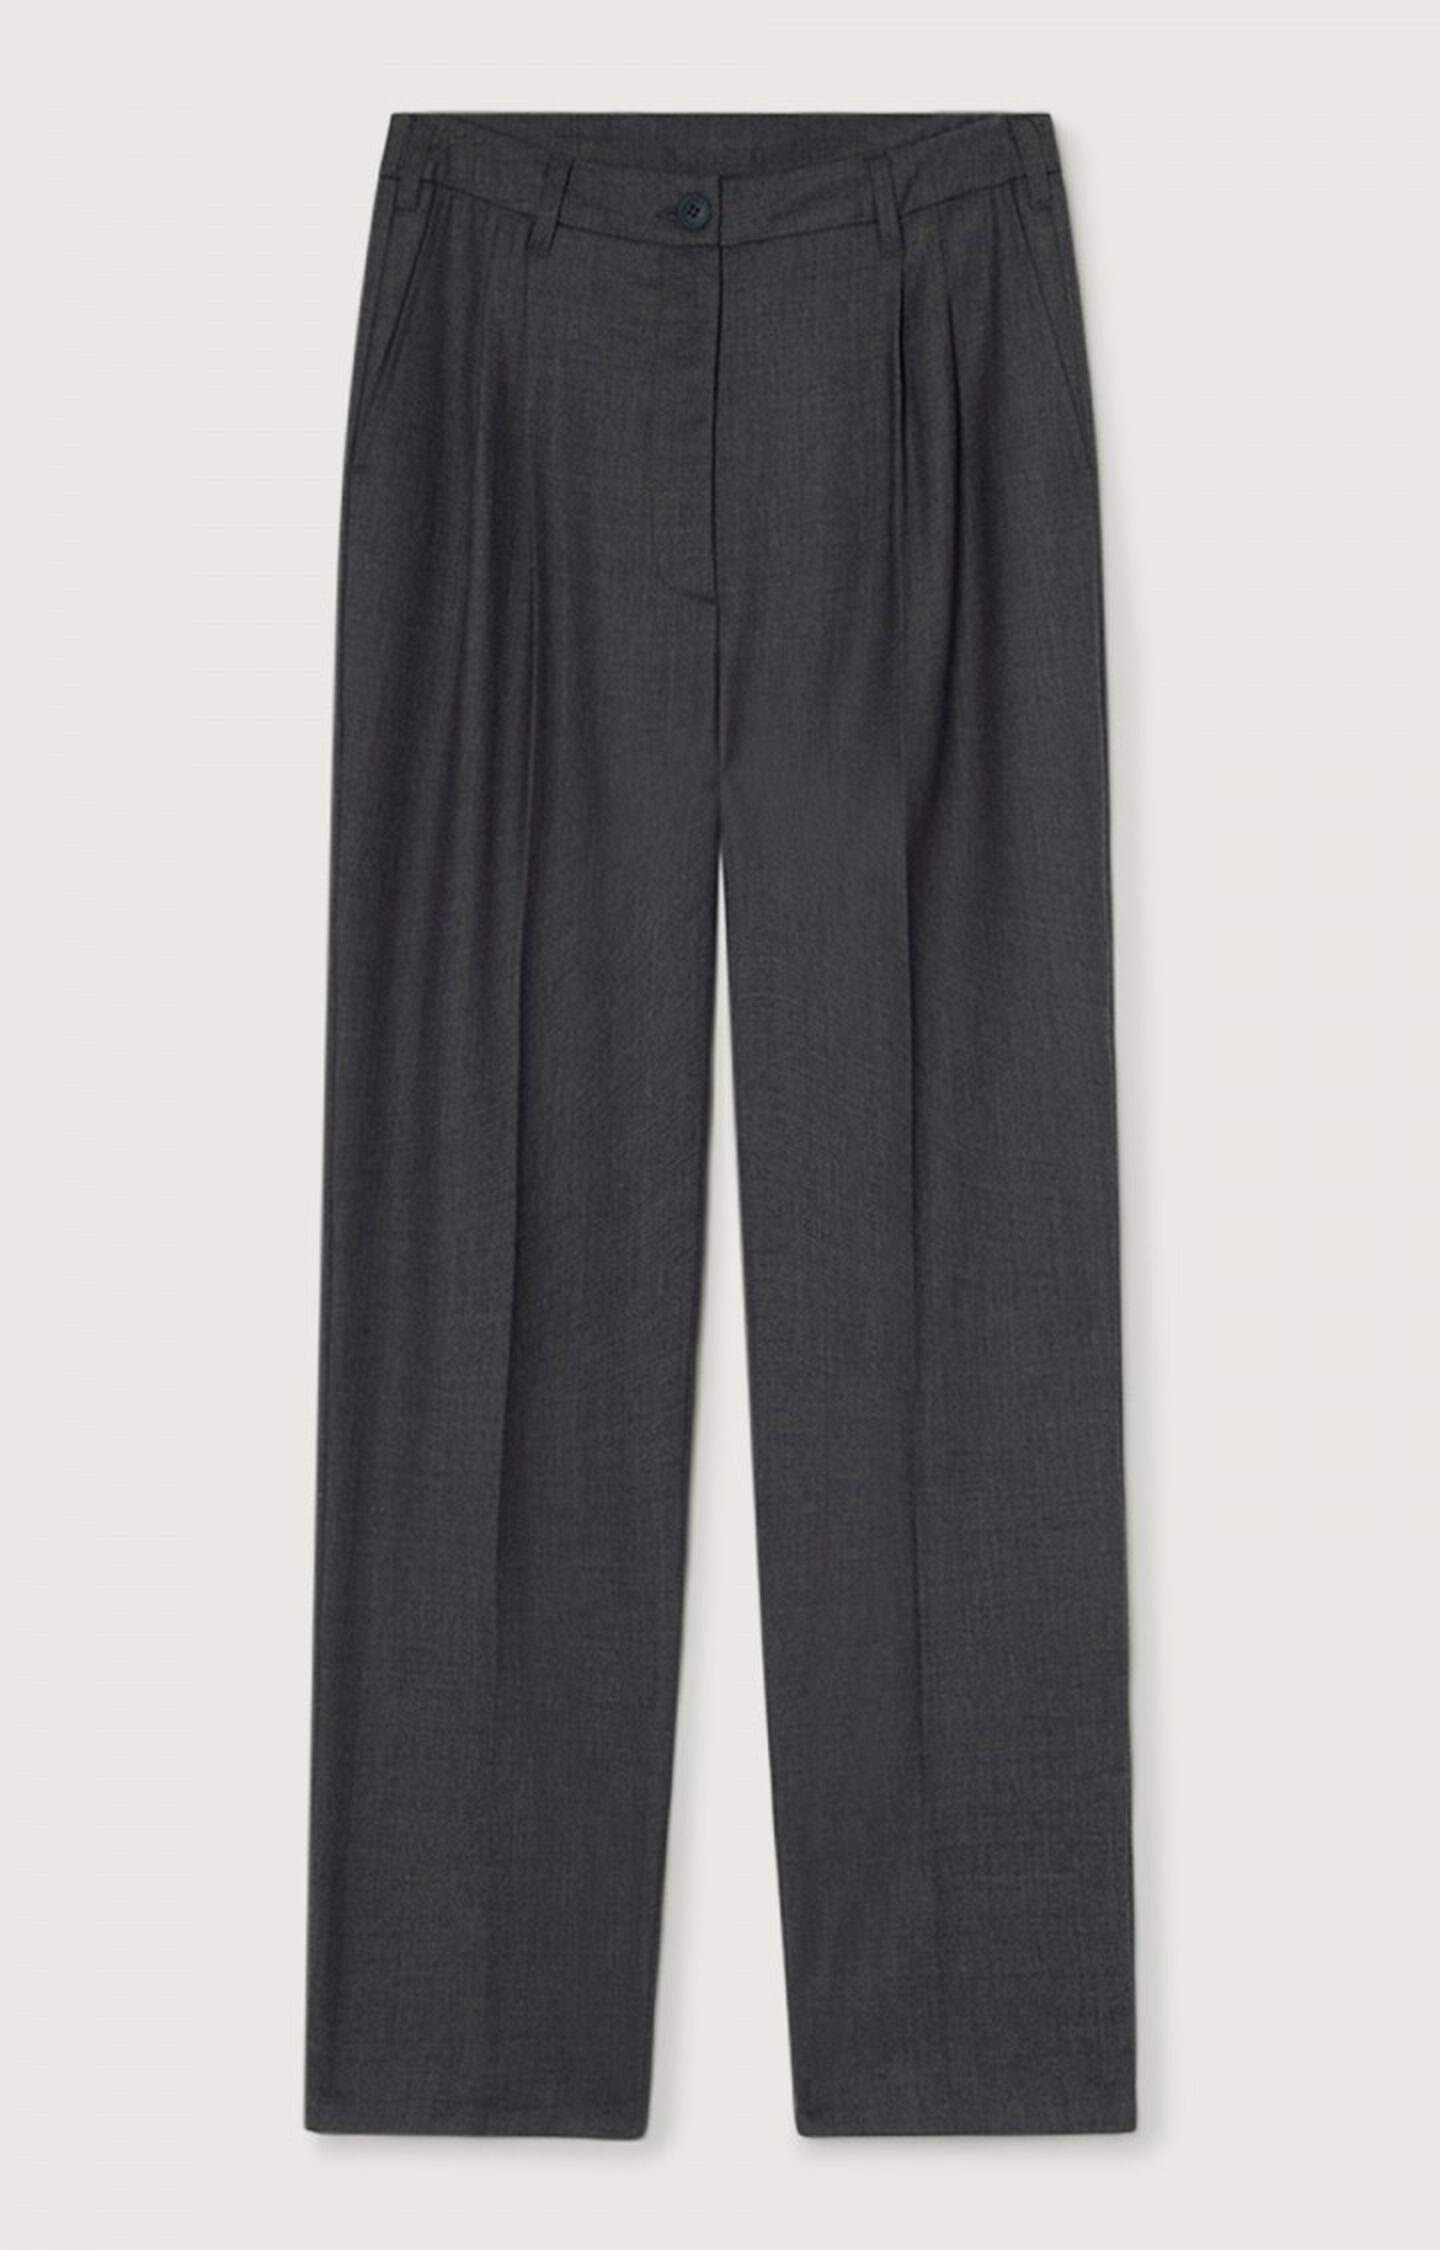 VINTAGE The Villager Women Charcoal Gray 100% Virgin Wool Pleated Dress  Pants